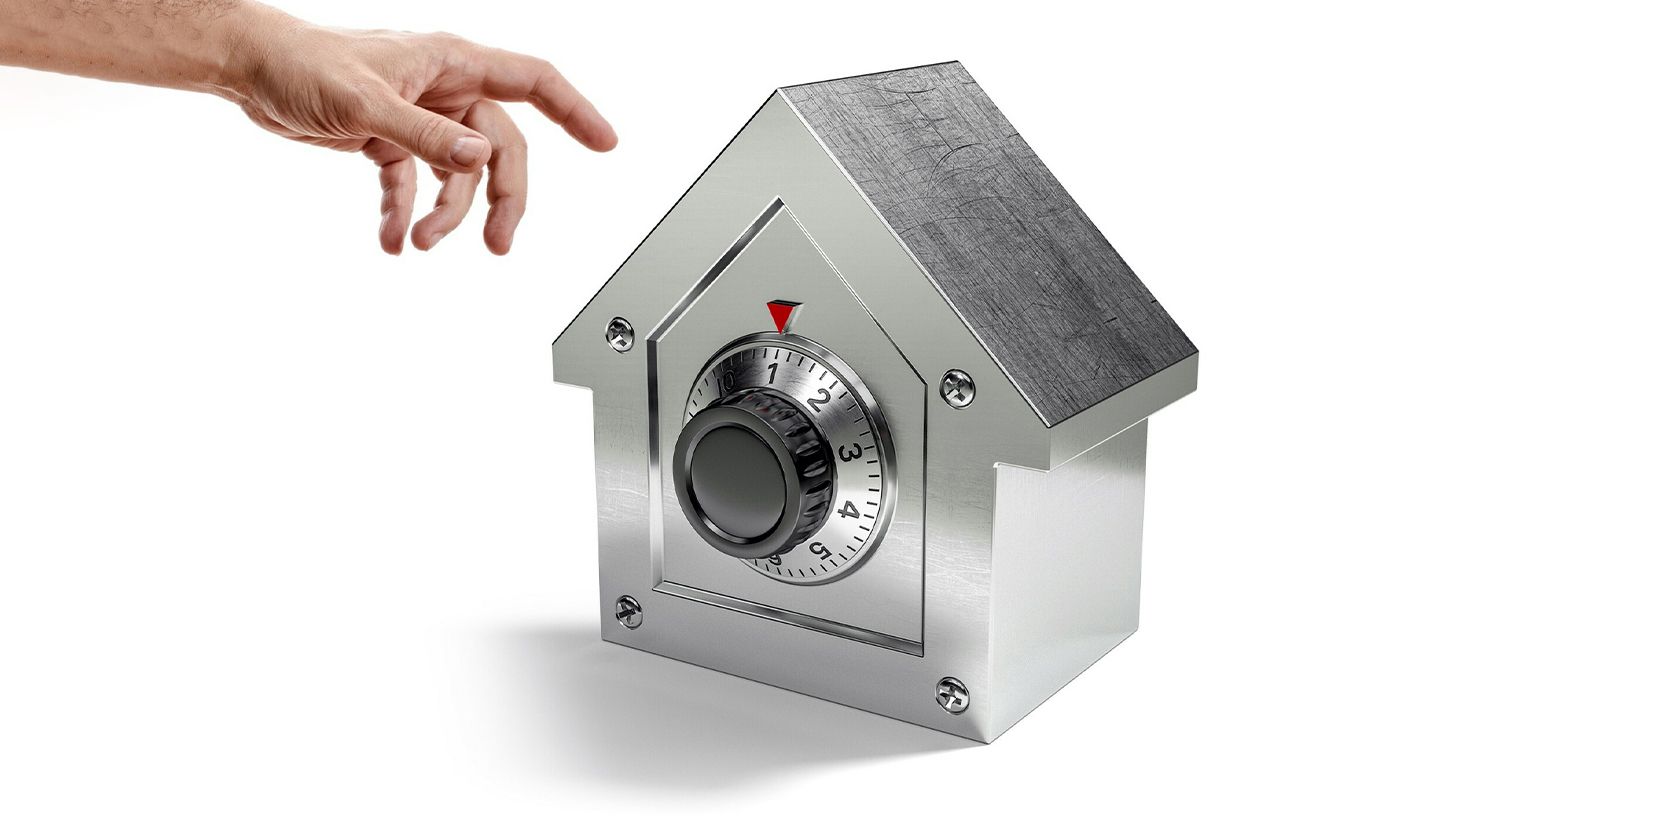 A safe in the shape of a house reaching out